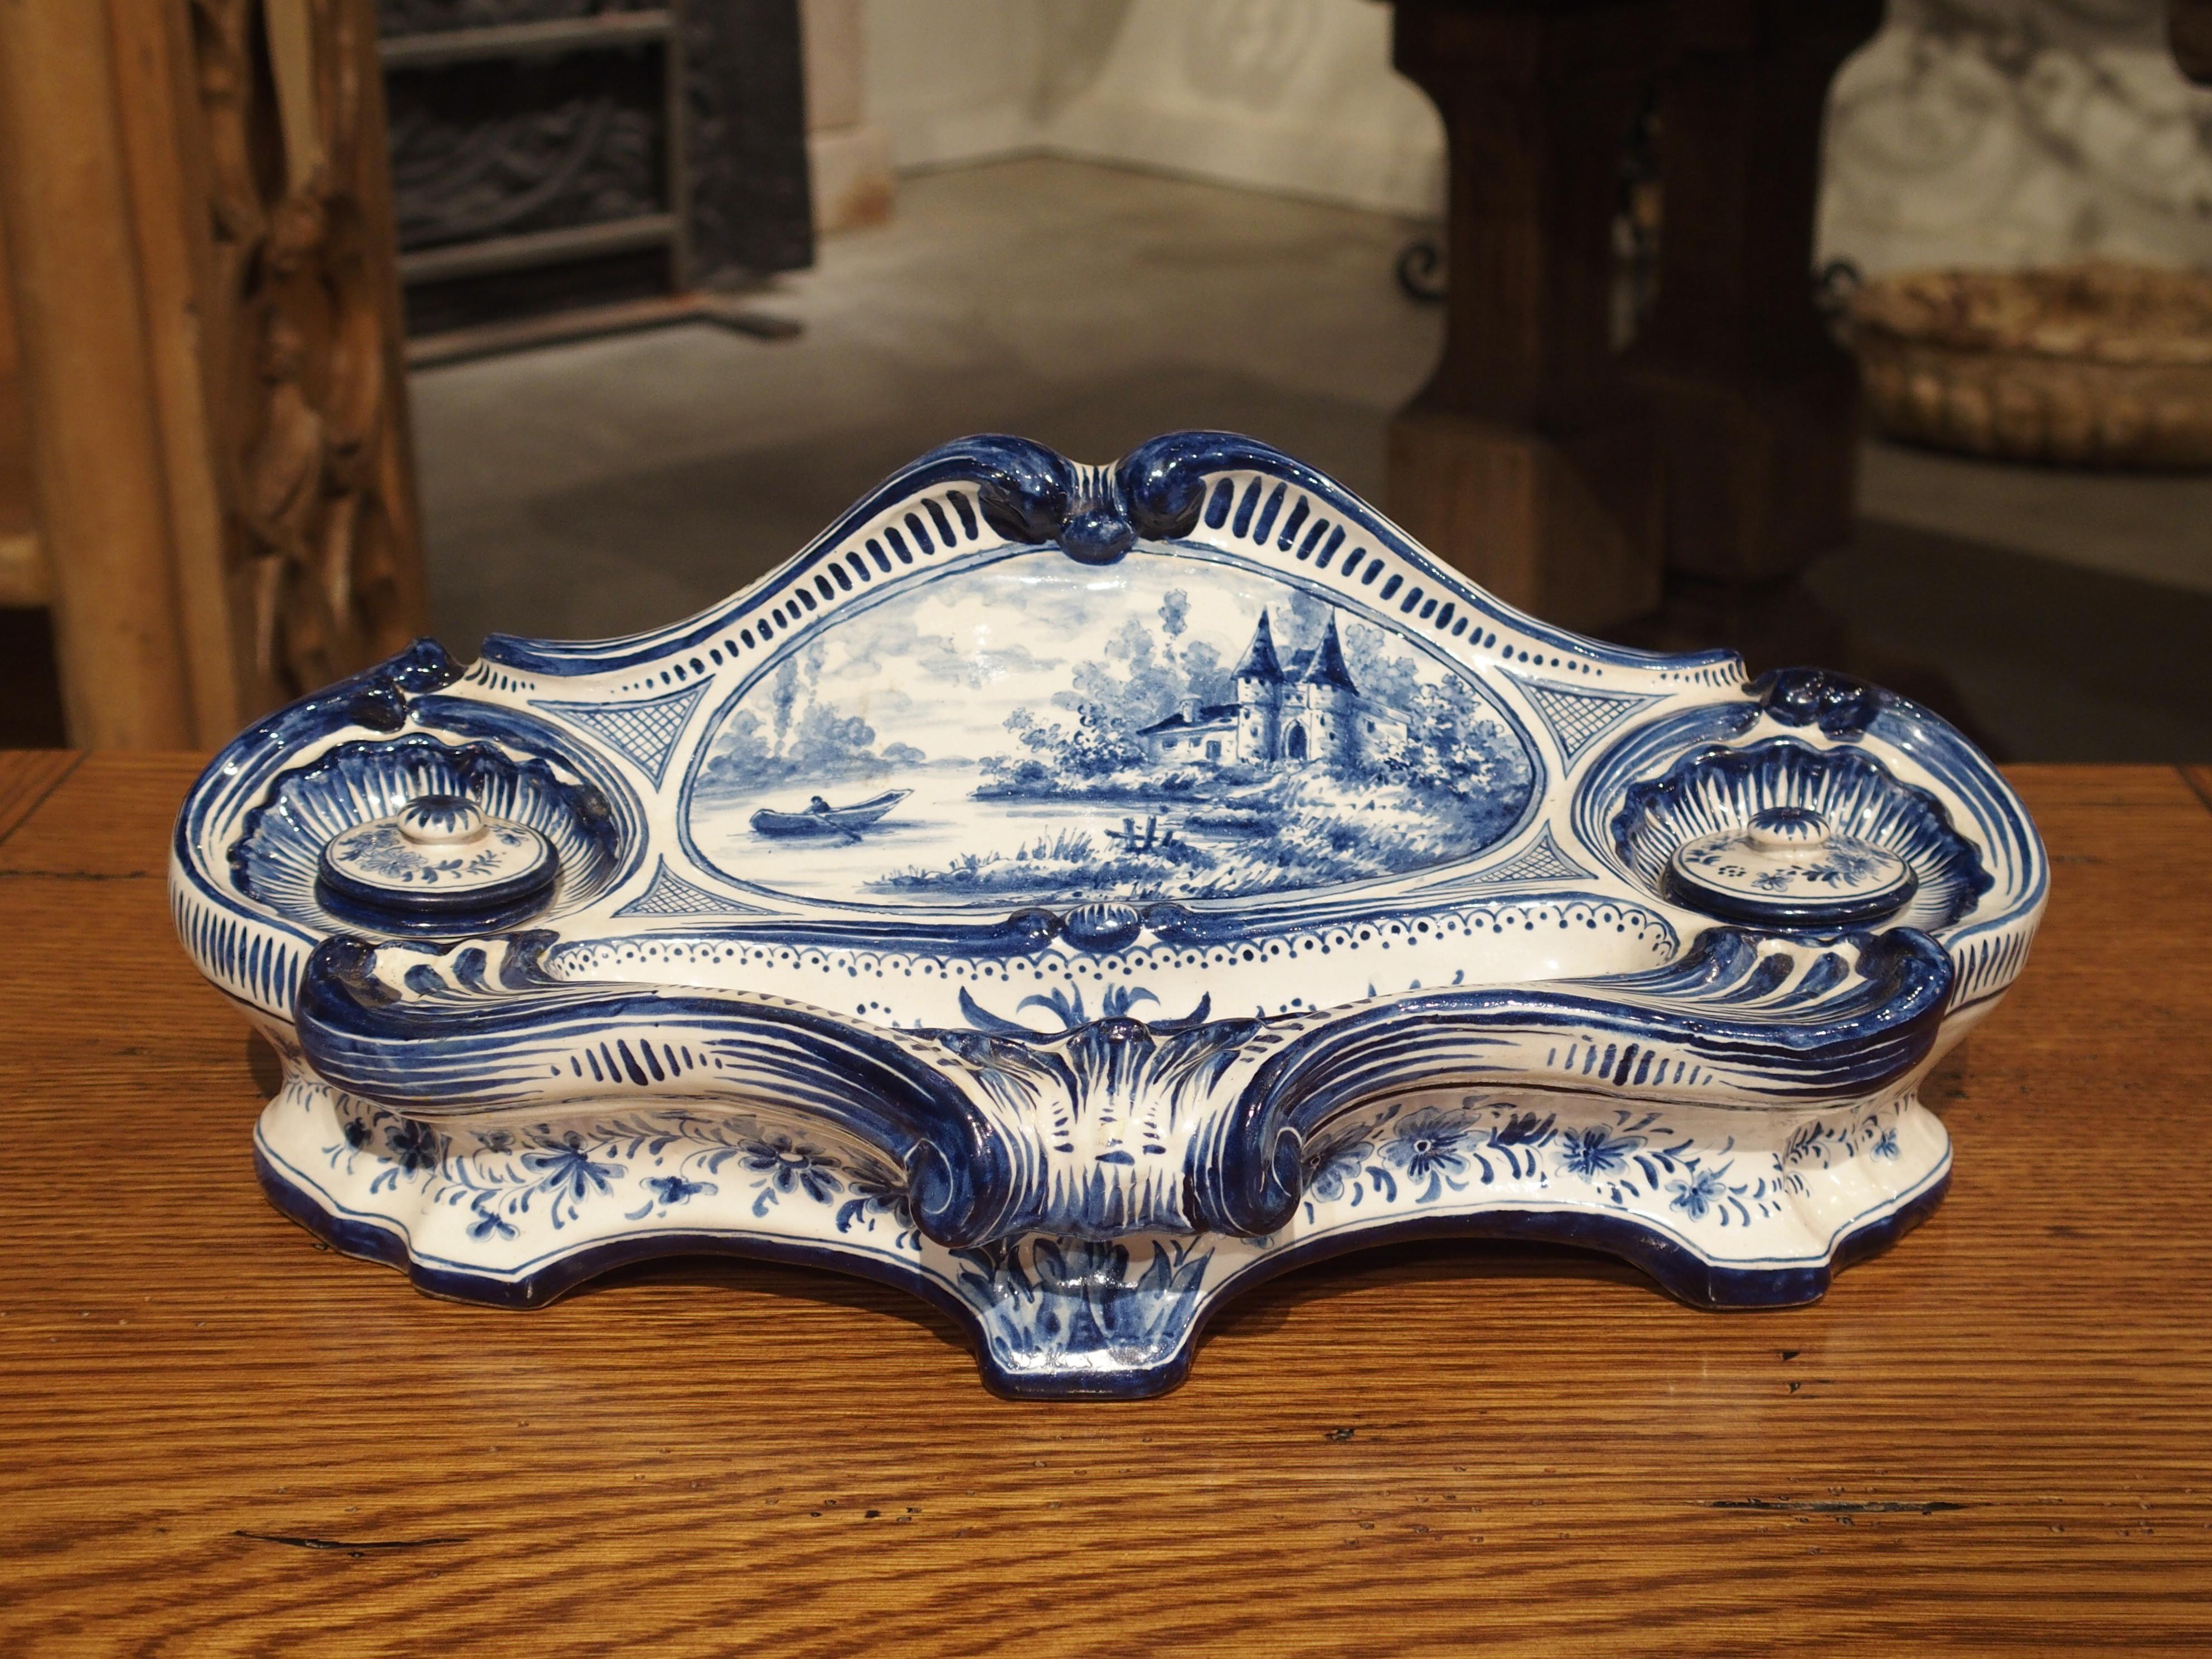 The charm of this French faience inkwell lies in the hand painted decor and its unique shape.

The central medallion depicts a person rowing a boat towards a chateau surrounded by woods on the edge of the body of water. Flanking this scene are two